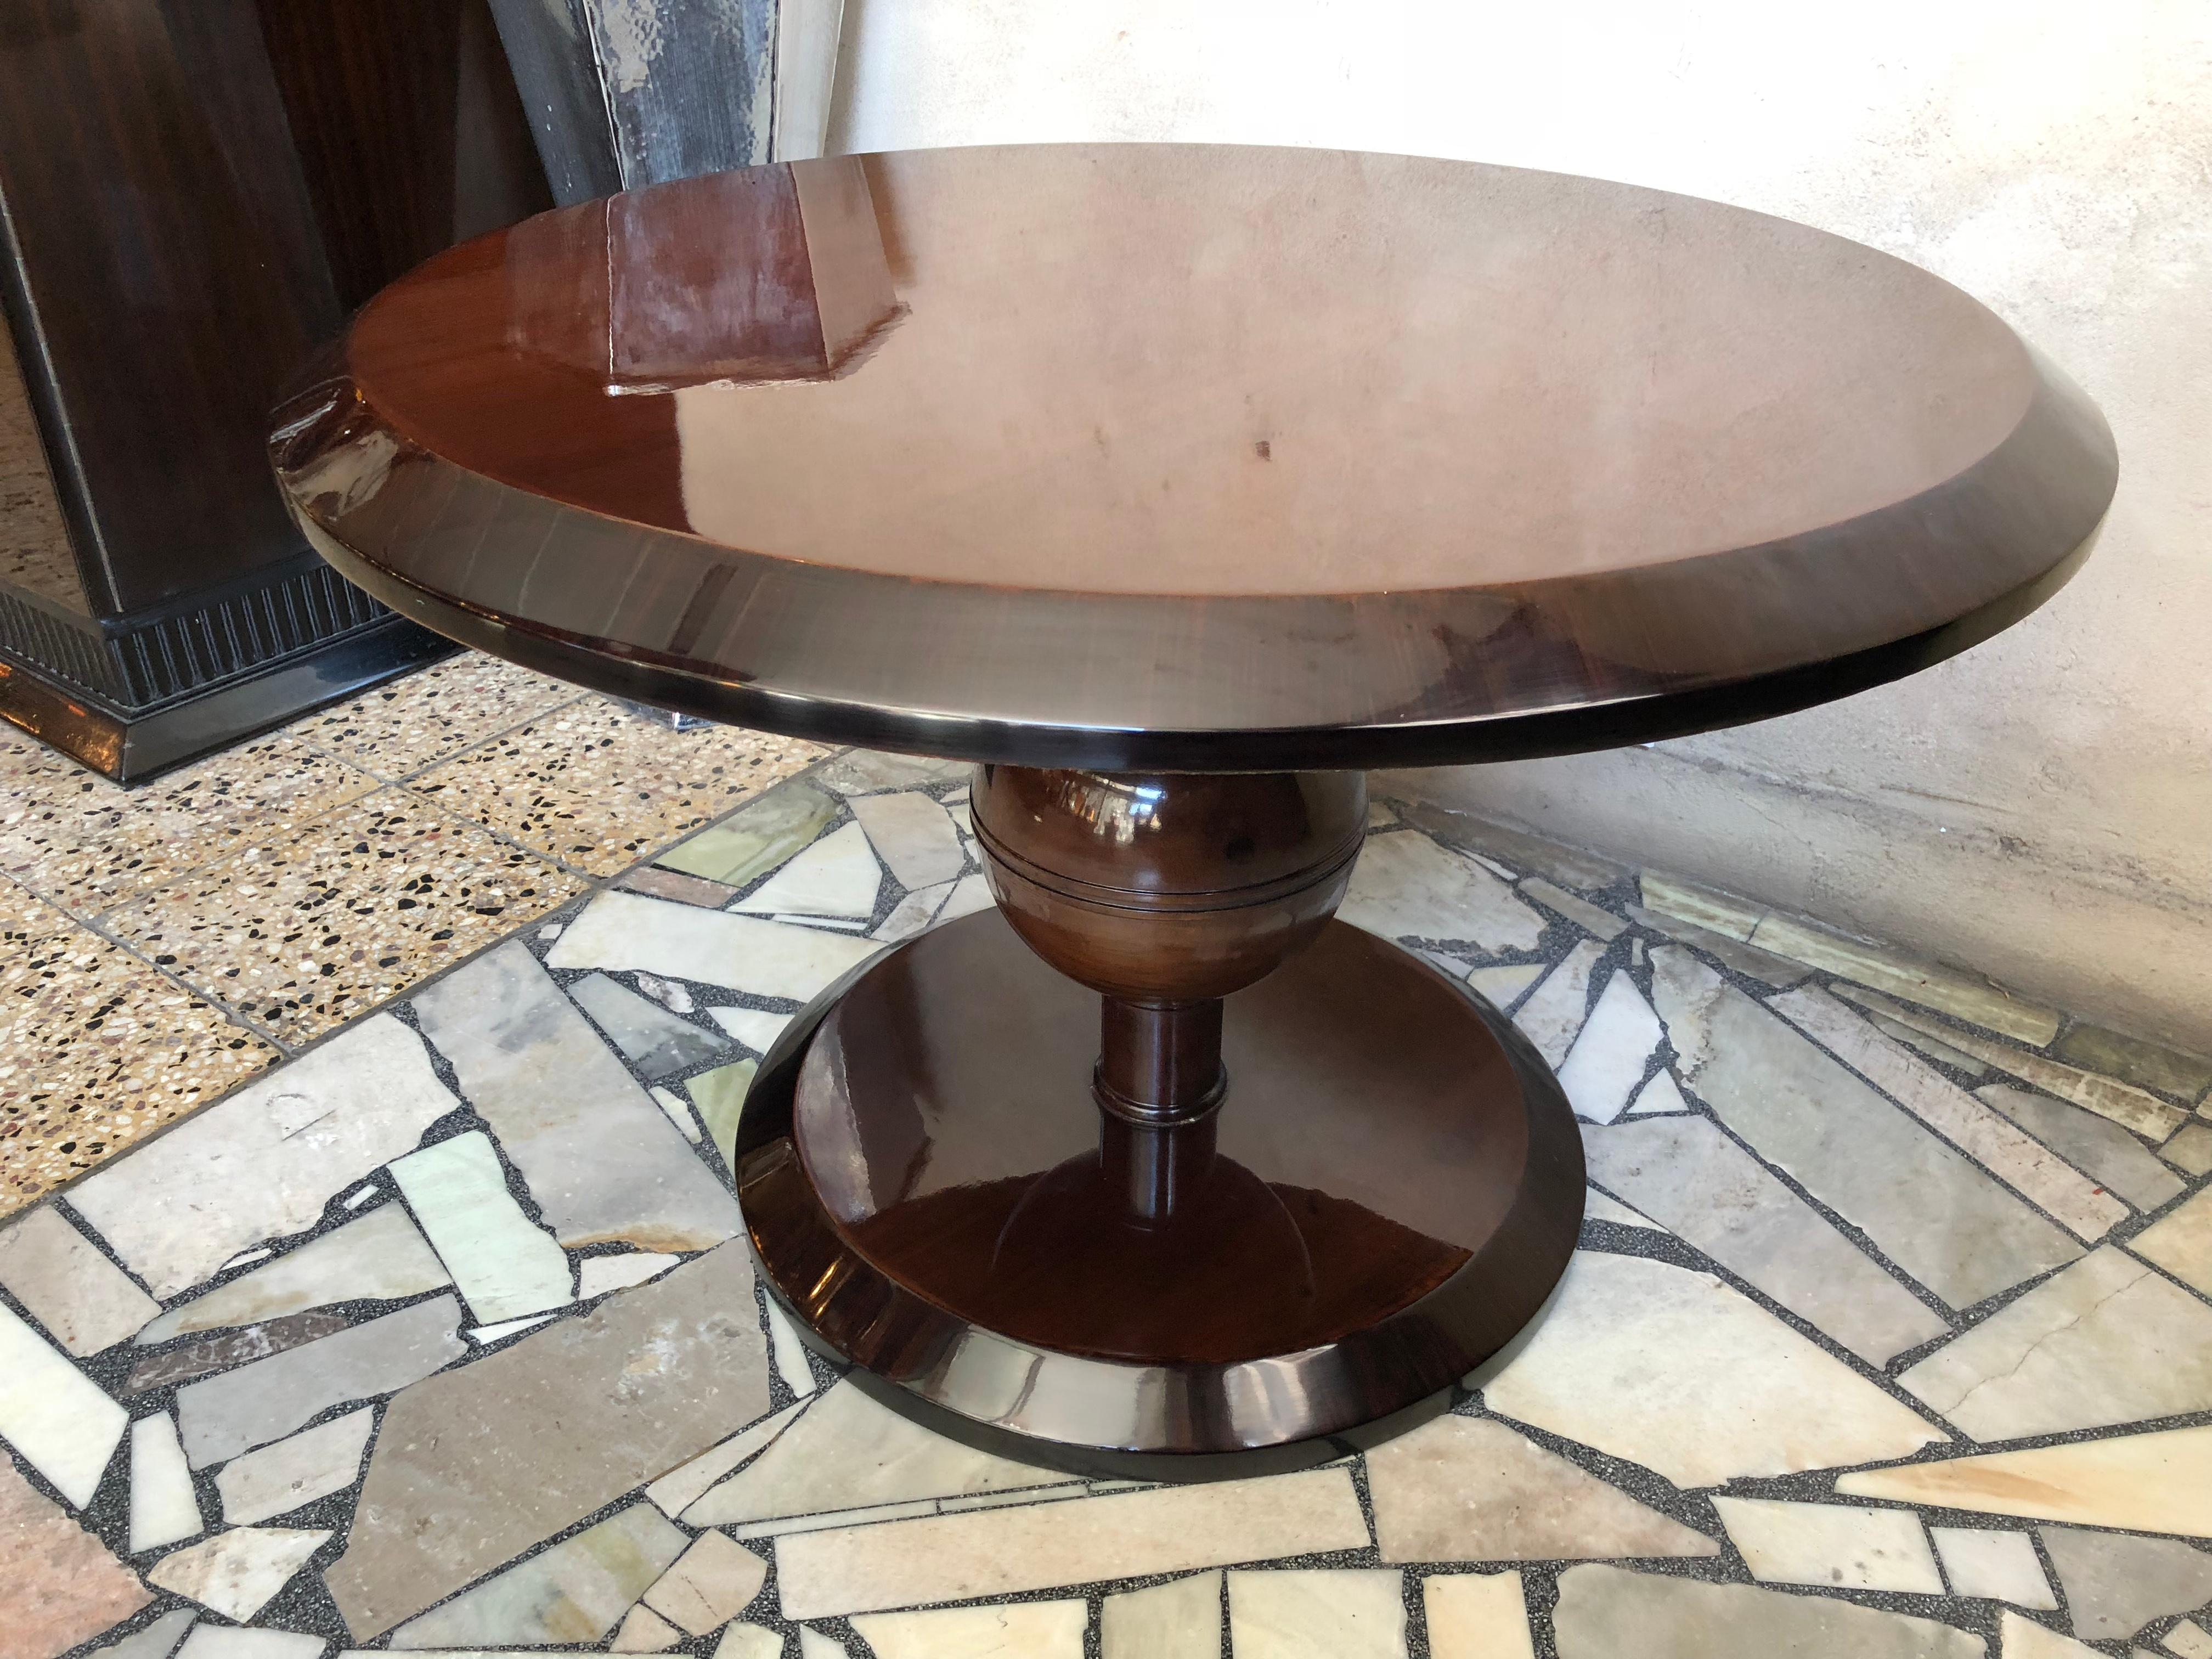 Coffe table

Style: Art Deco
Year: 1938
Country: France
It is an elegant and sophisticated coffe table.
You want to live in the golden years, this is the dining table that your project needs.
We have specialized in the sale of Art Deco and Art